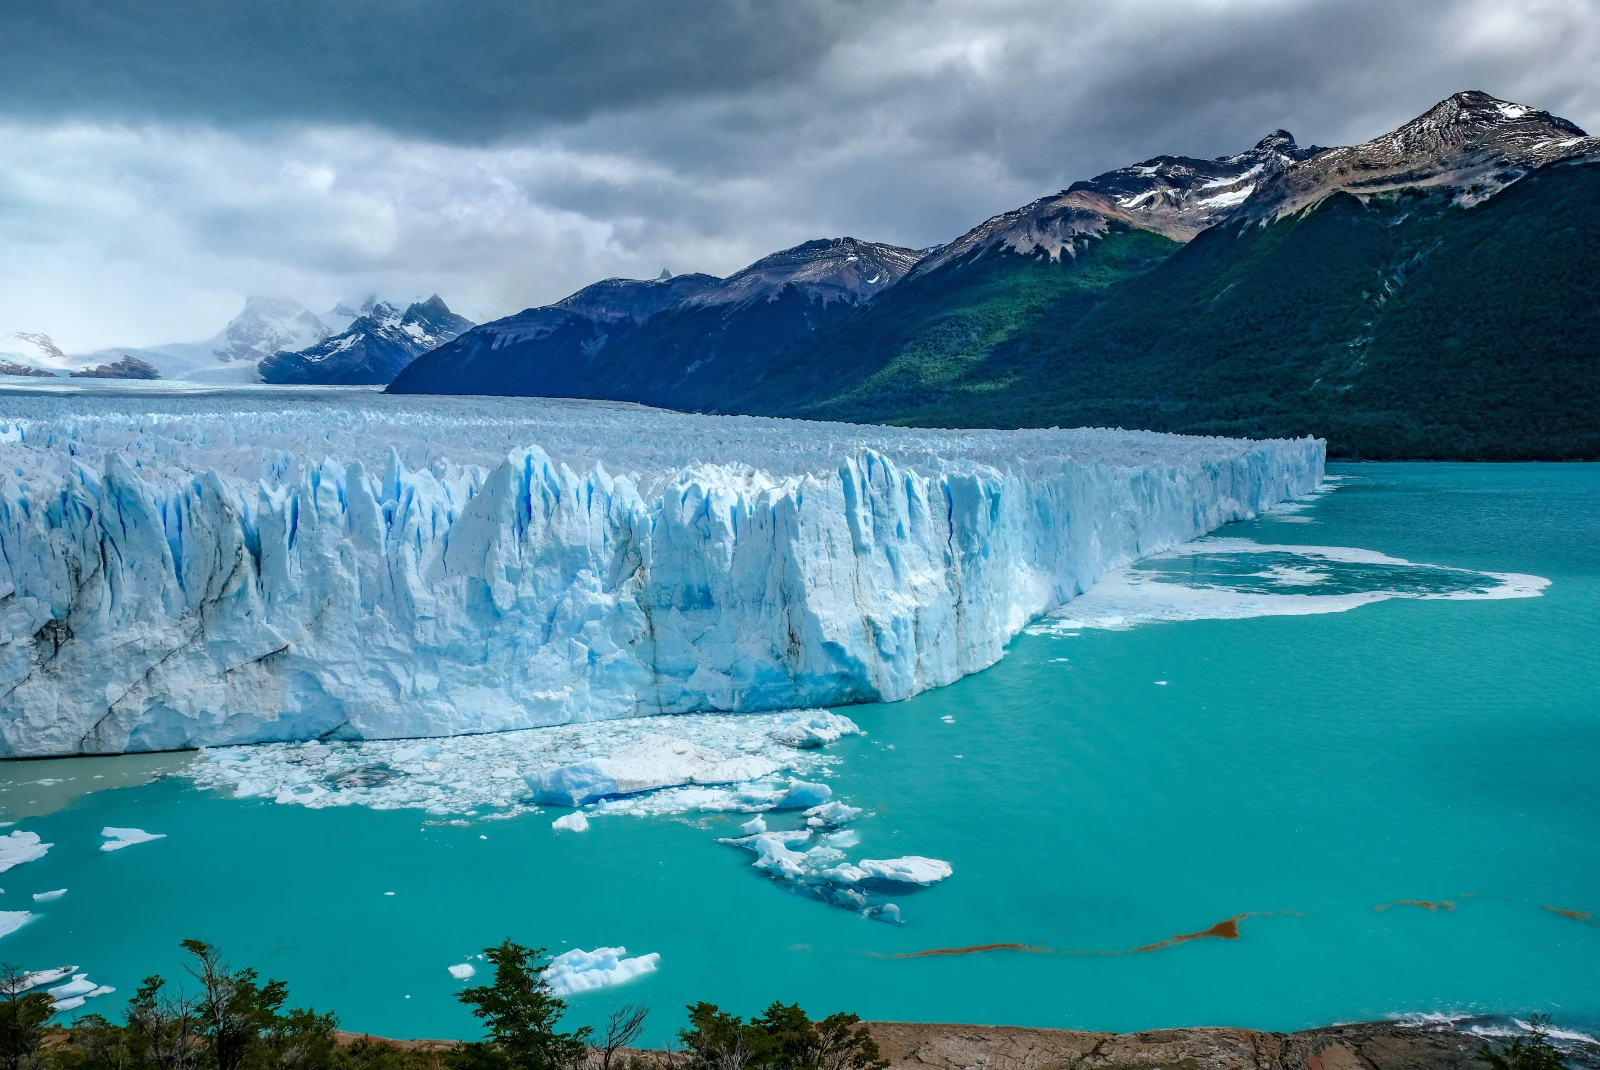 An aerial view of the white and blue glacier, Perito Moreno, in El Calafate, Argentina floating in a light blue freshwater lake with green trees and white snow-capped mountains around.